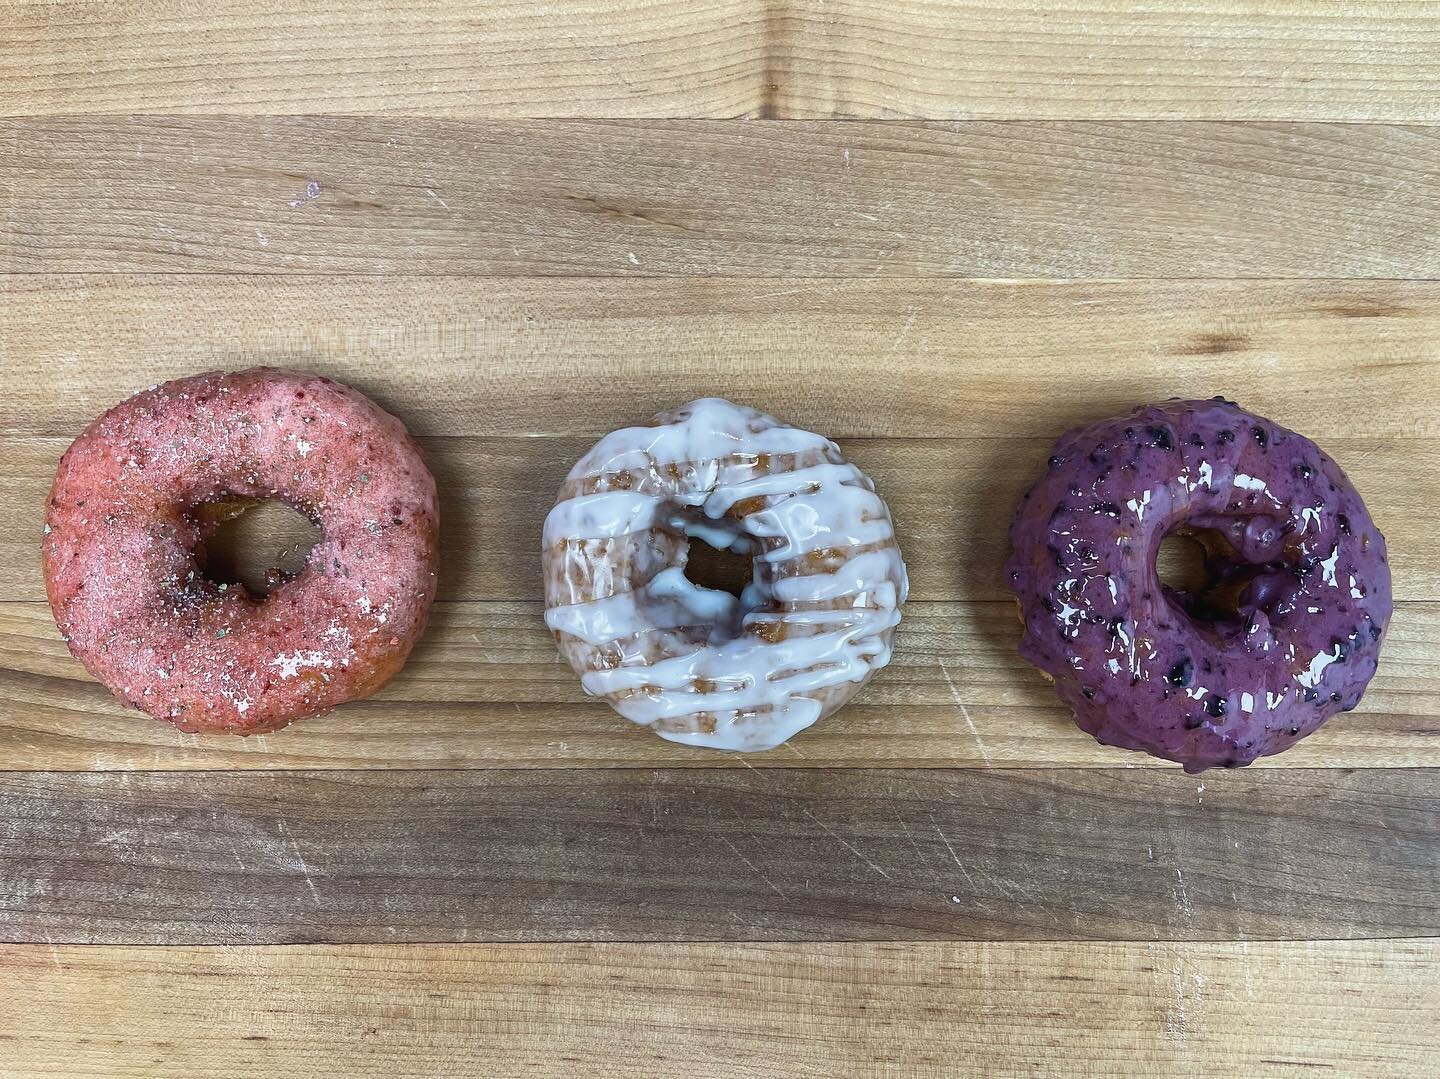 Strawberry + Classic + Blueberry = Our #redwhiteandblue 🍩🍓🫐

Happy 4th of July! Stop by and pick up doughnuts to add to your celebrations!